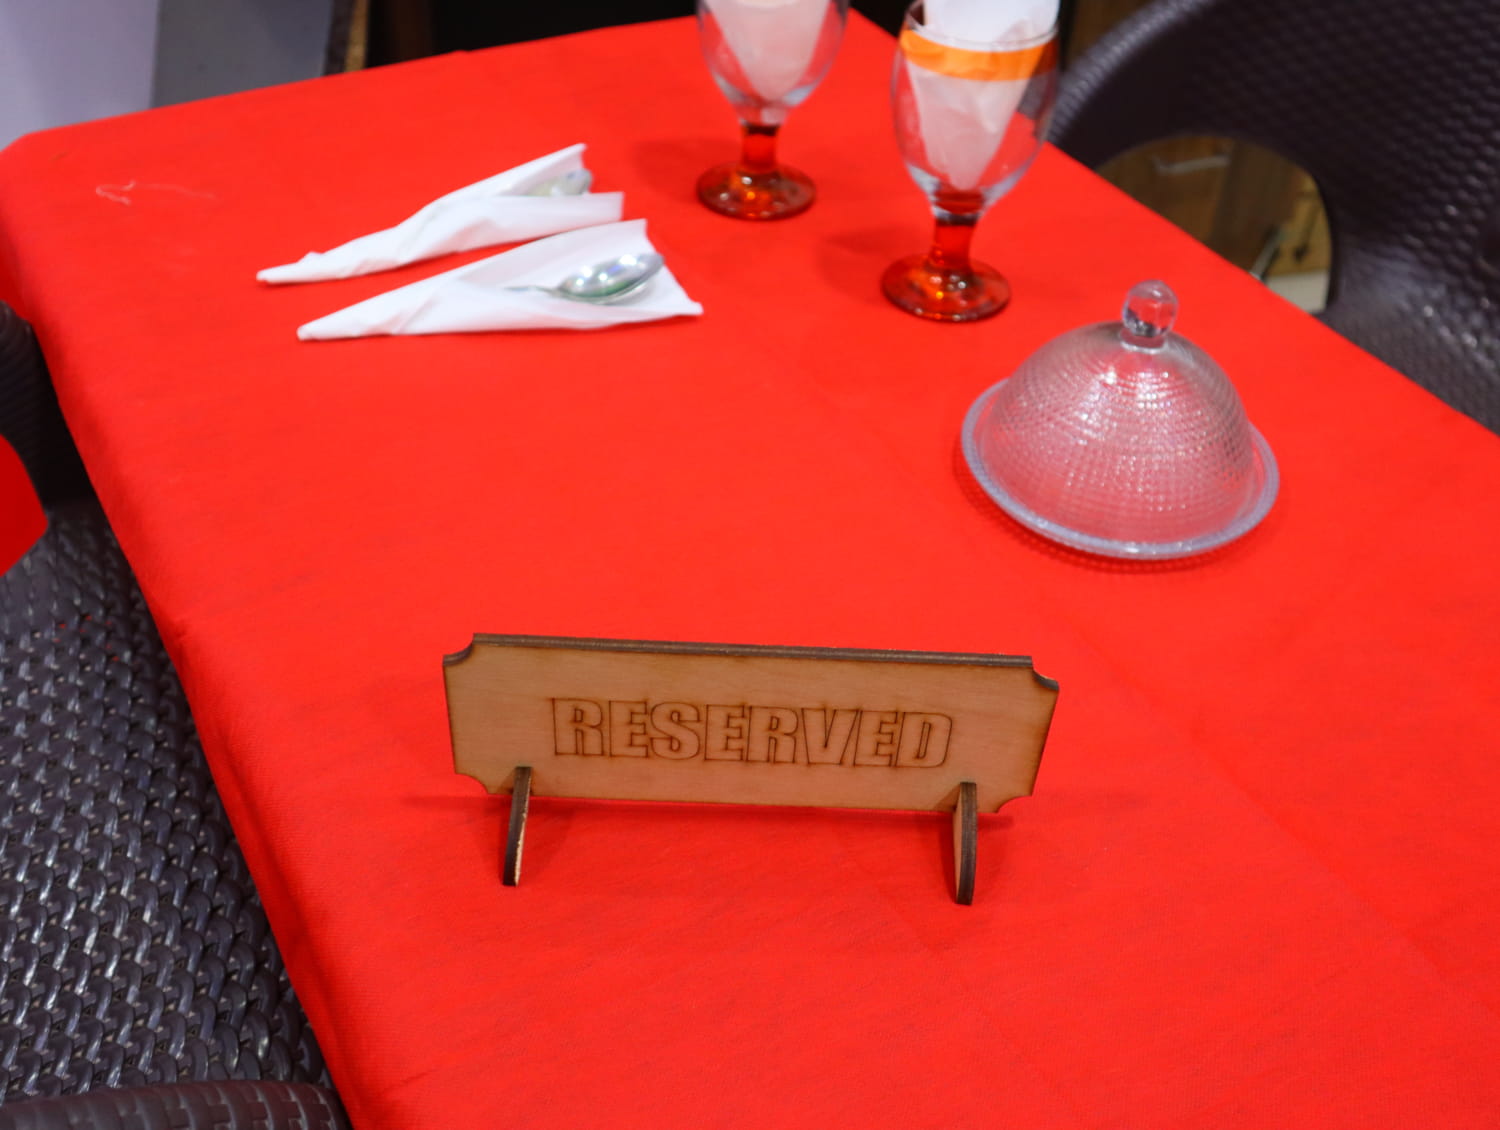 Laser Cut Reserved Table Top Sign Free Vector